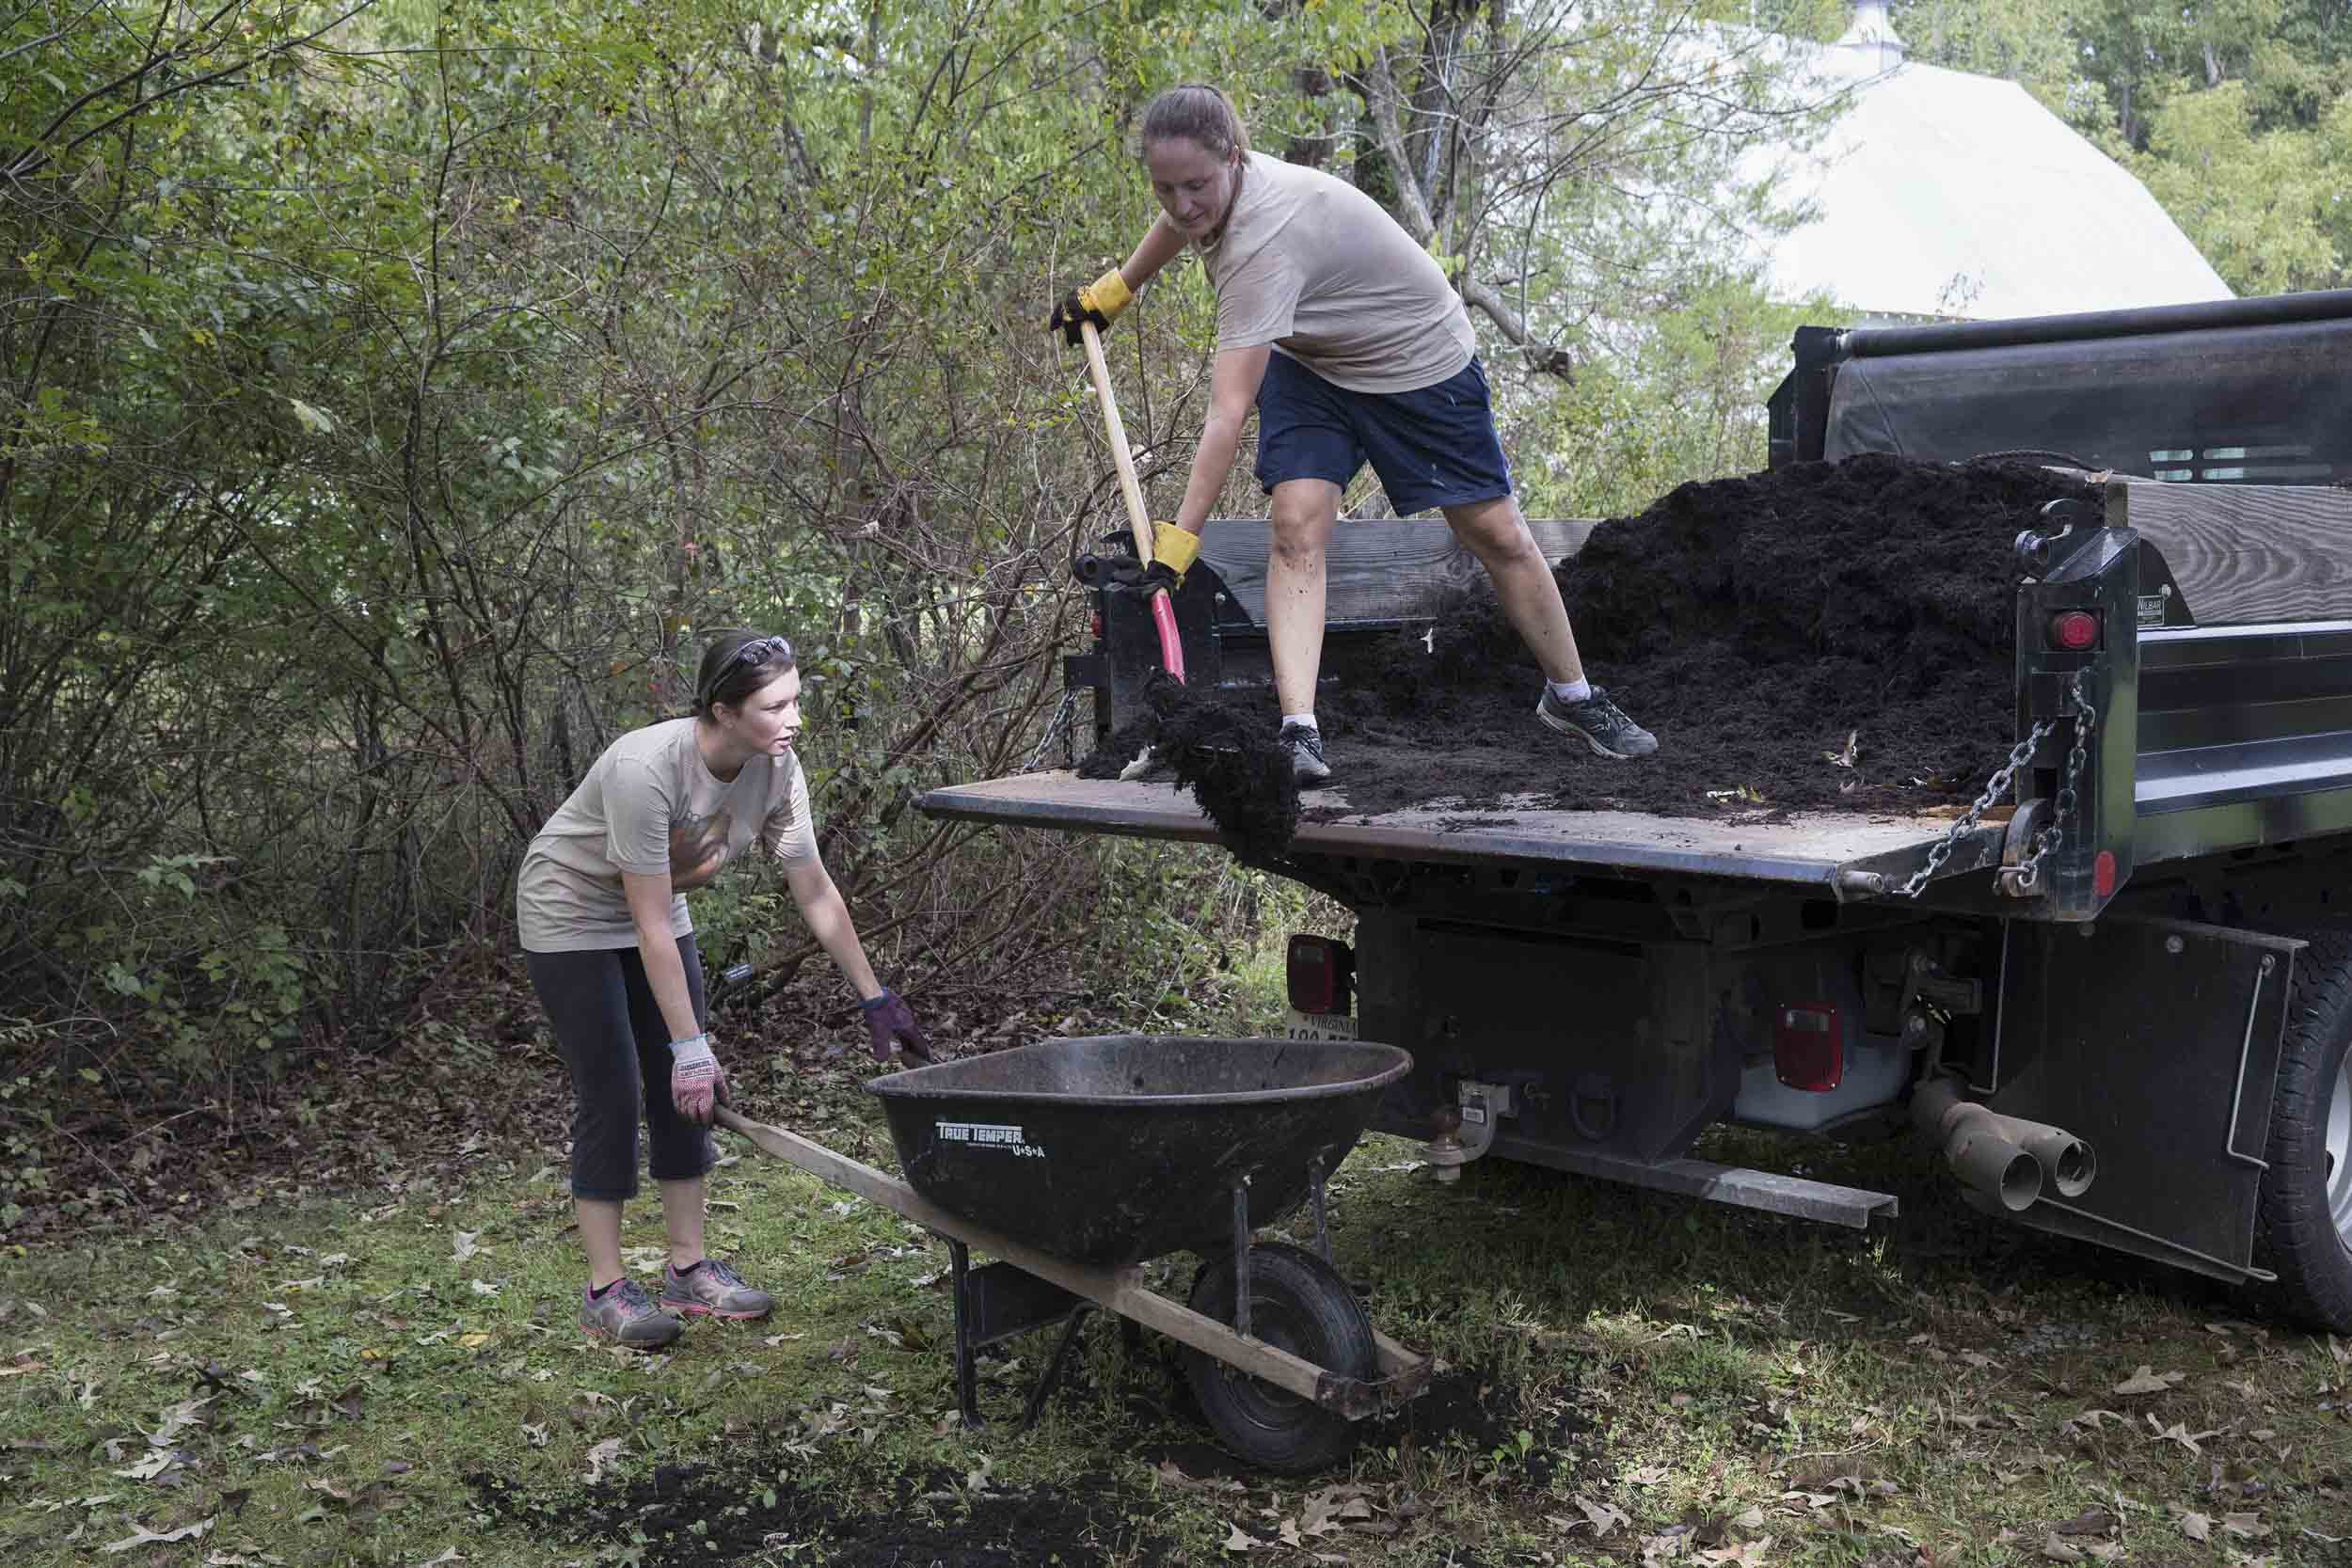 Voluteer shovels mulch from a truck to a wheel barrow that another volunteer is holding